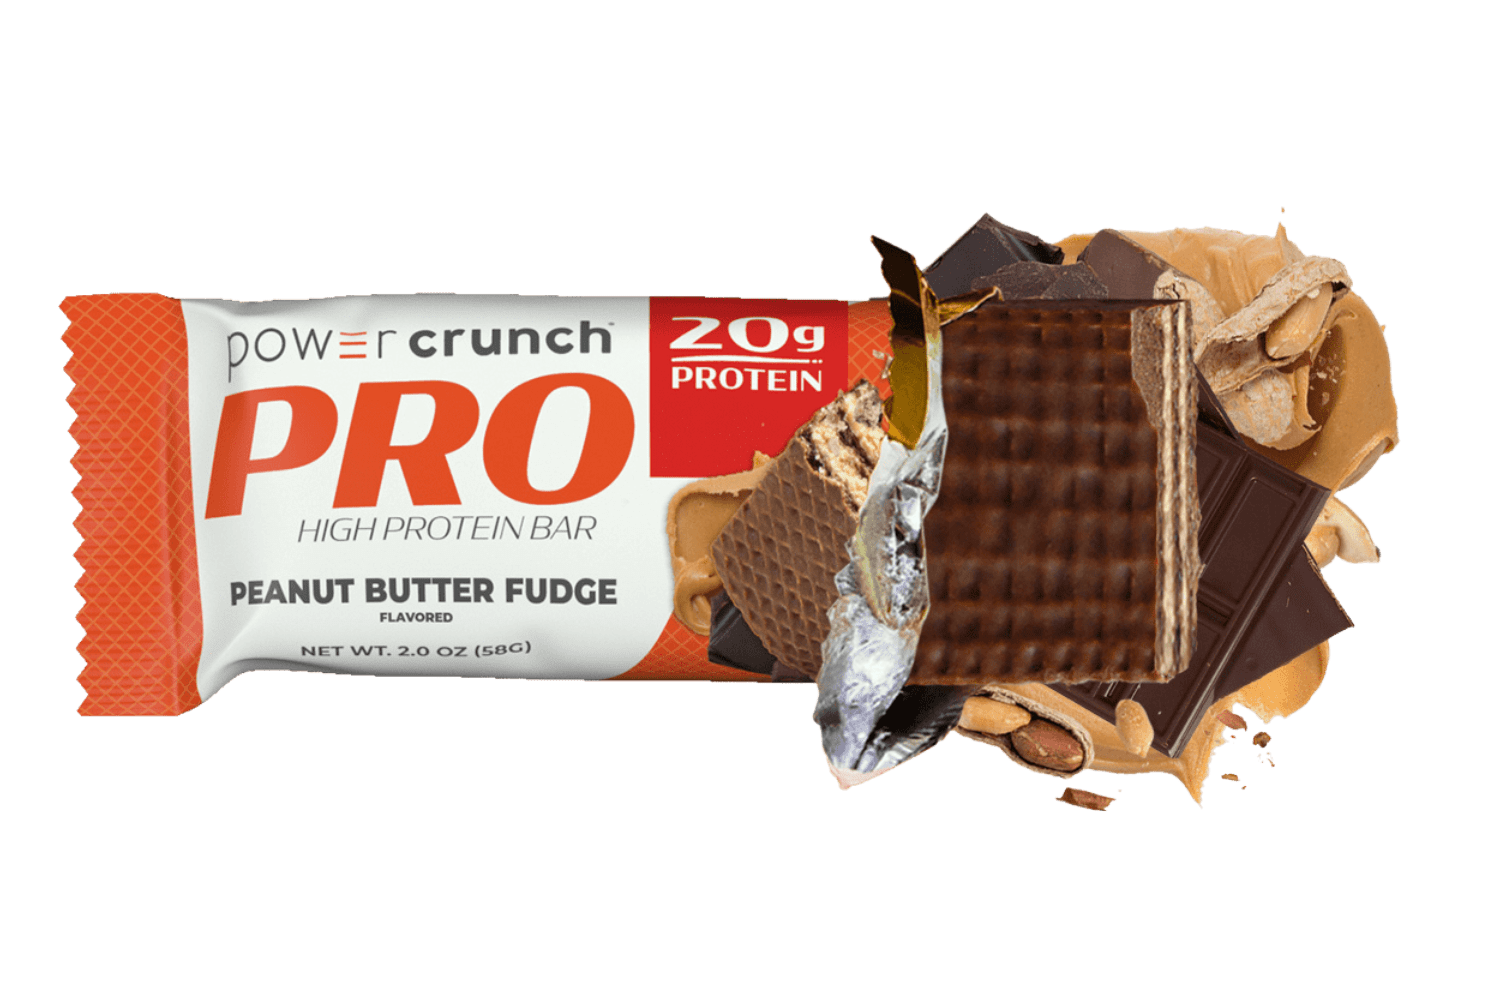 High Protein Bars - 20g of Whey Protein | Power Crunch PRO